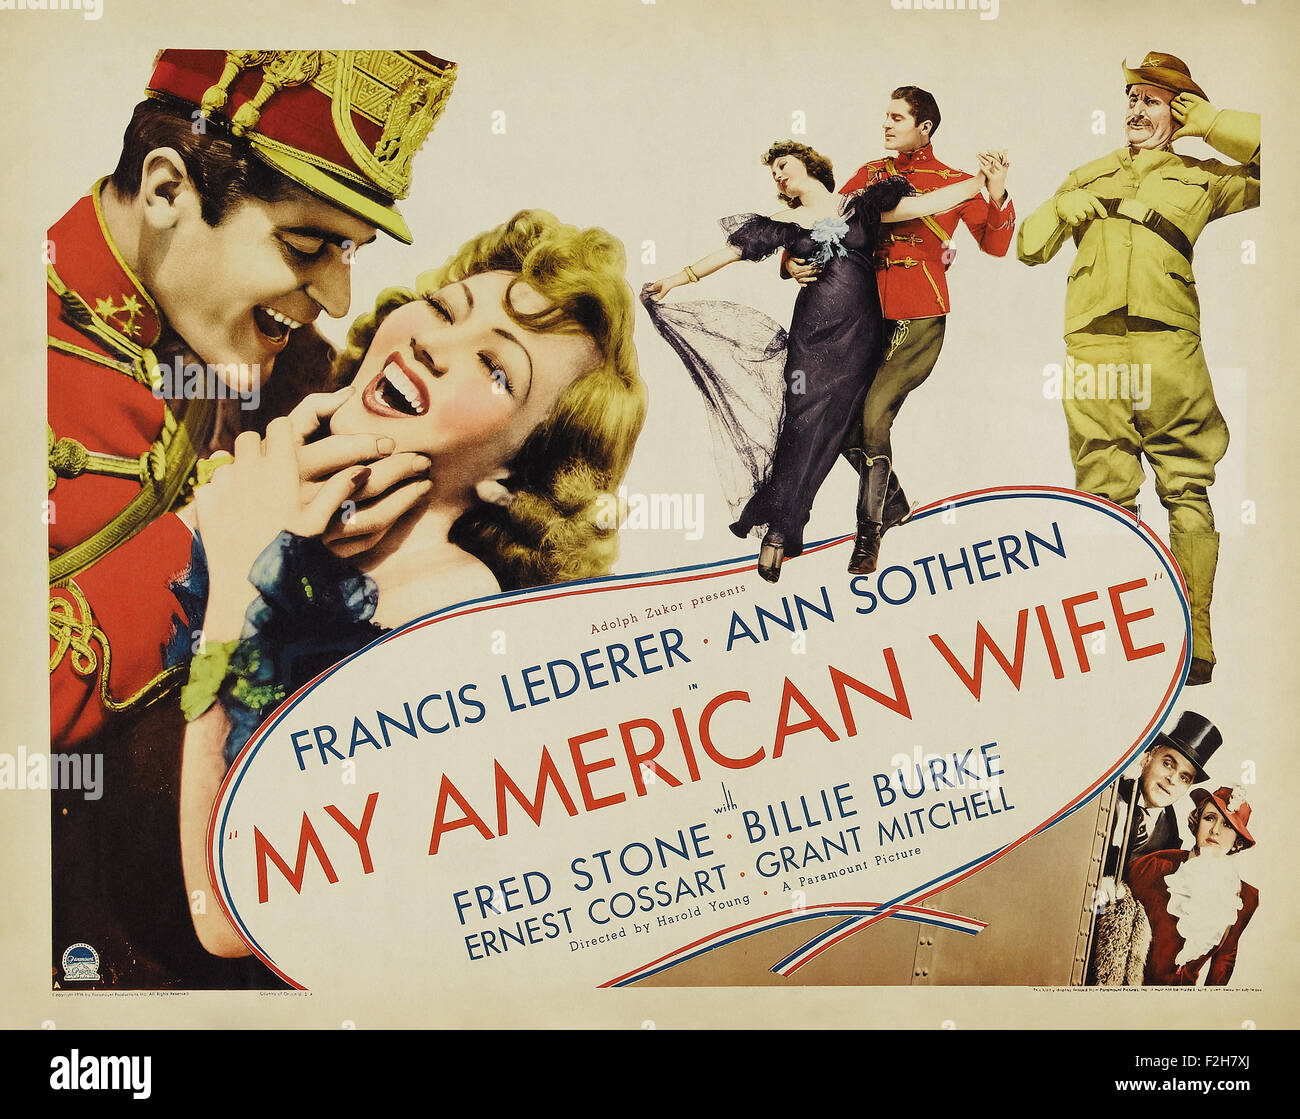 My American Wife 01 - Movie Poster Stock Photo